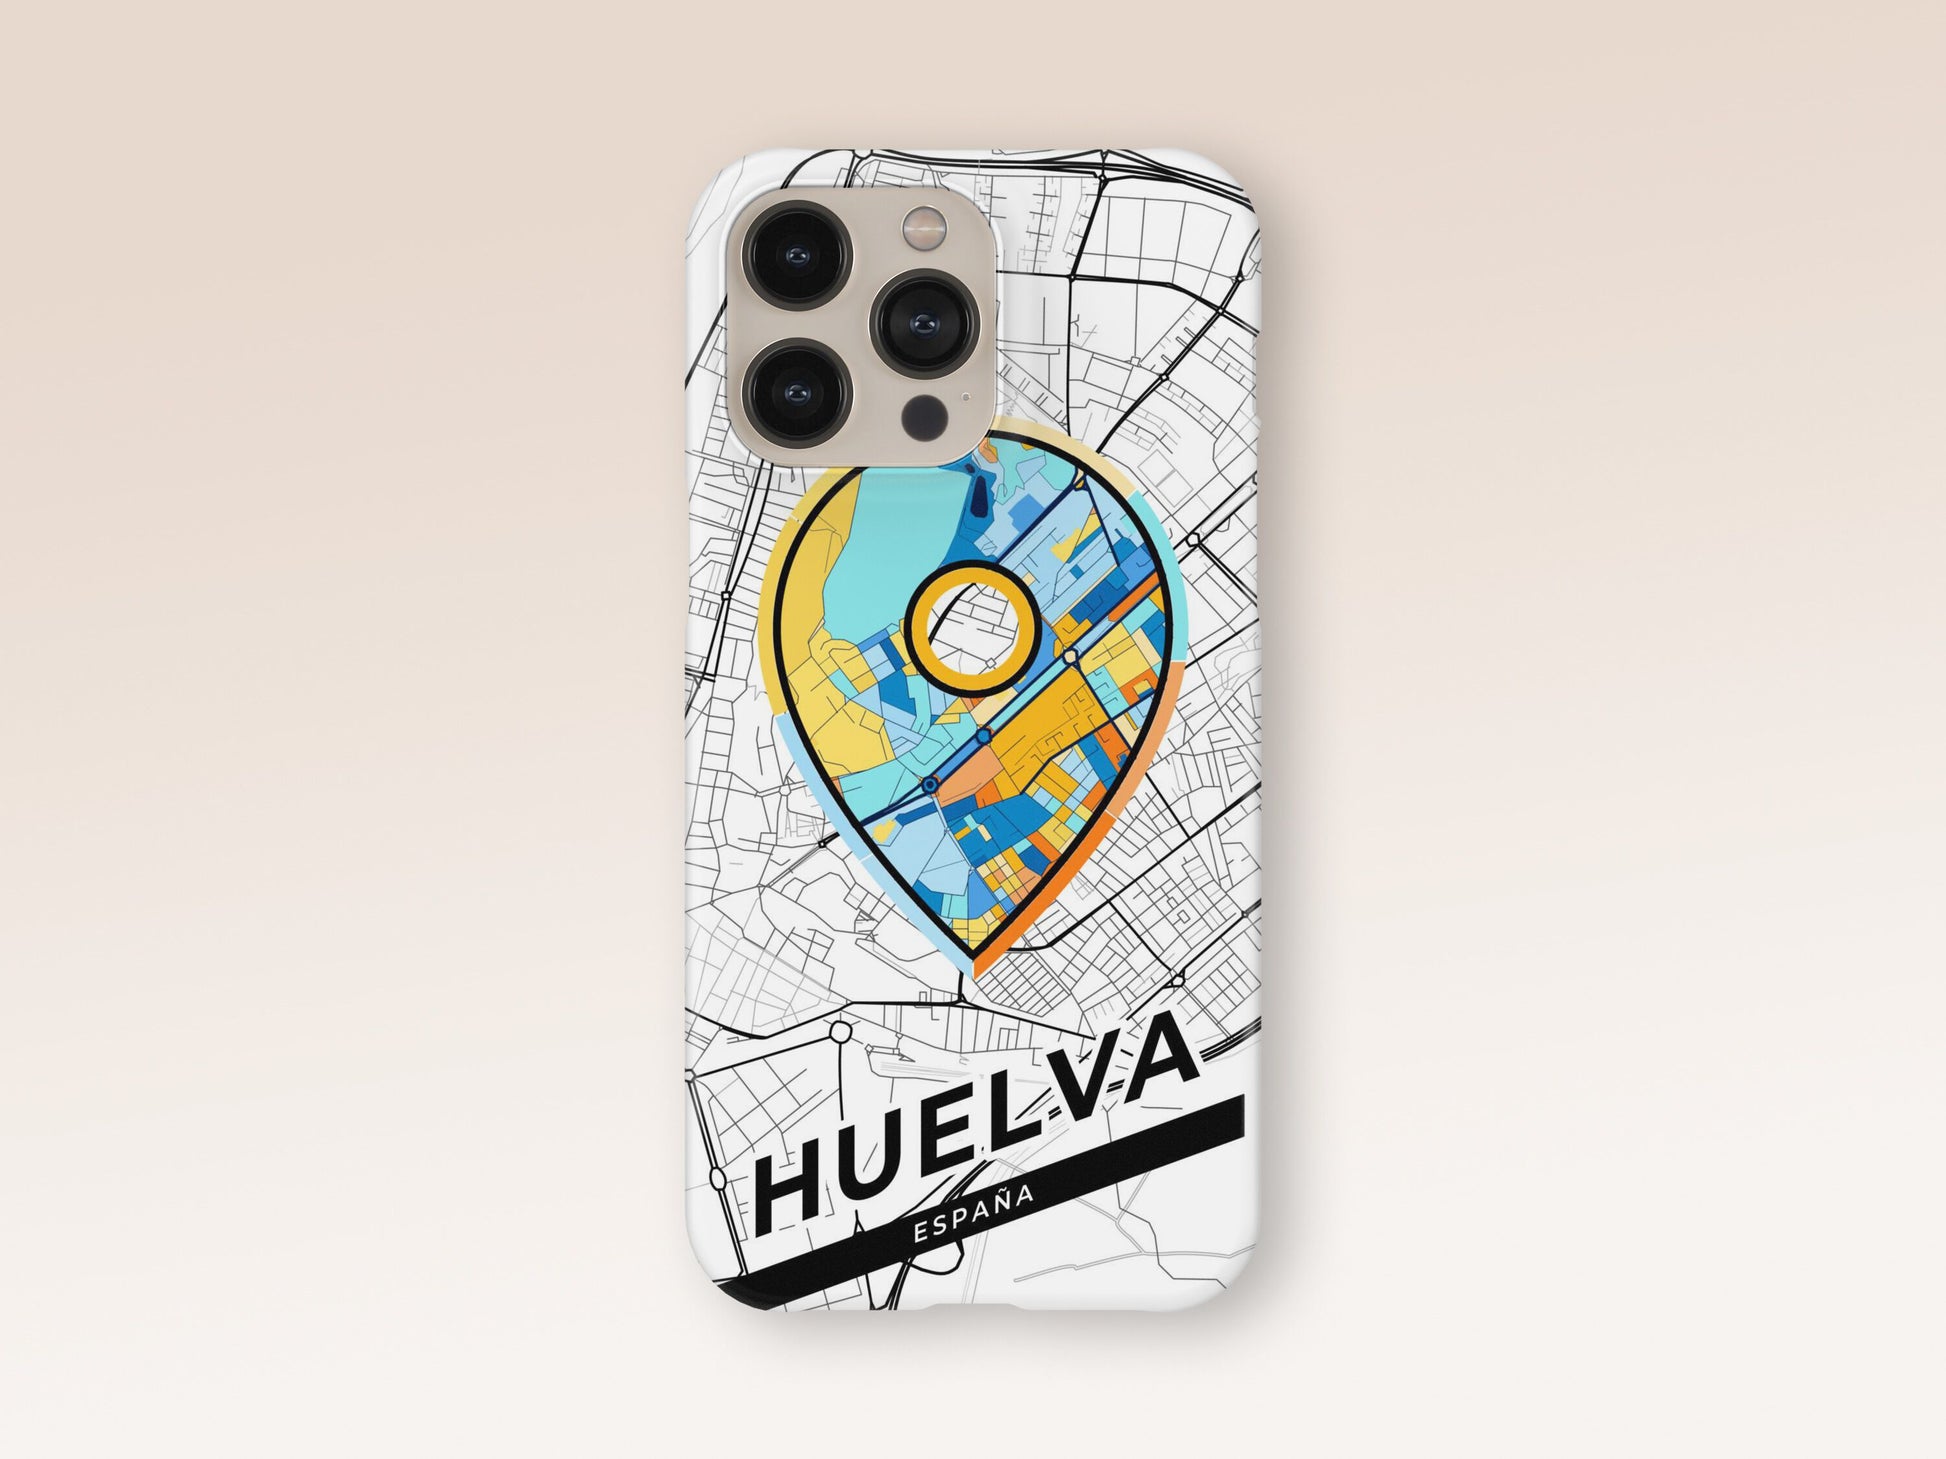 Huelva Spain slim phone case with colorful icon. Birthday, wedding or housewarming gift. Couple match cases. 1